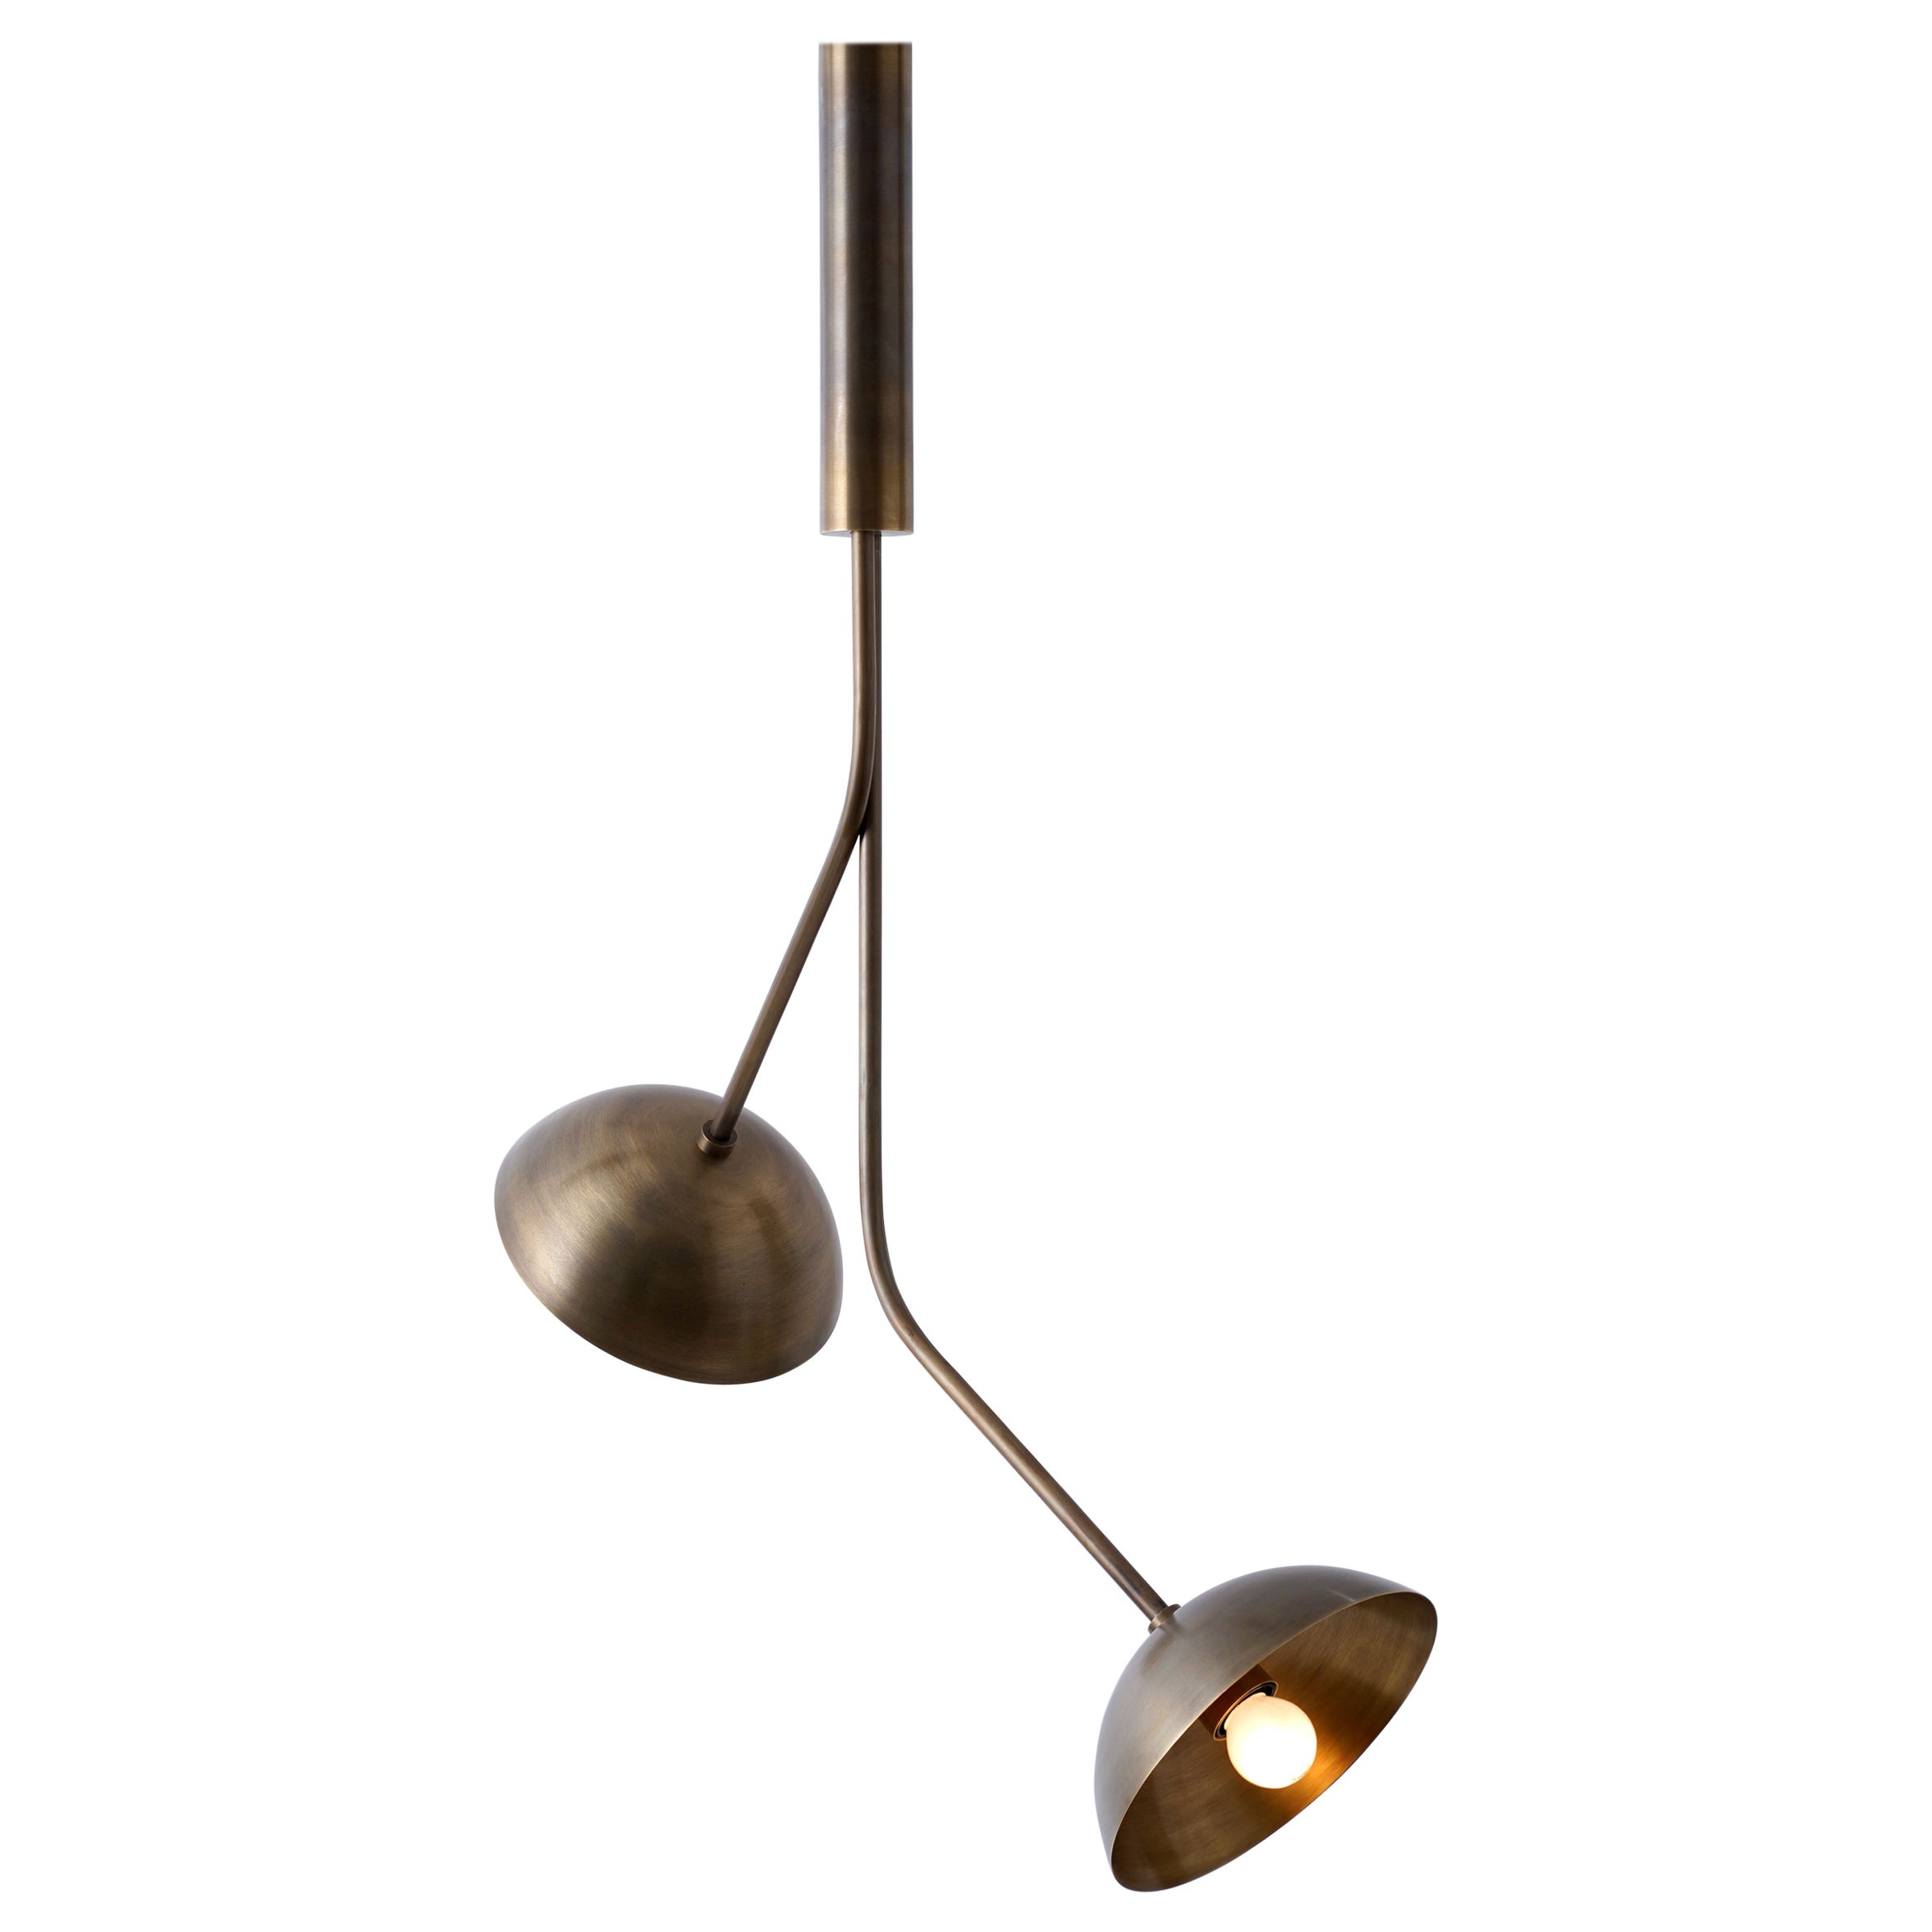 Rhythm 2 Brass Dome Suspension Lamp by Lamp Shaper